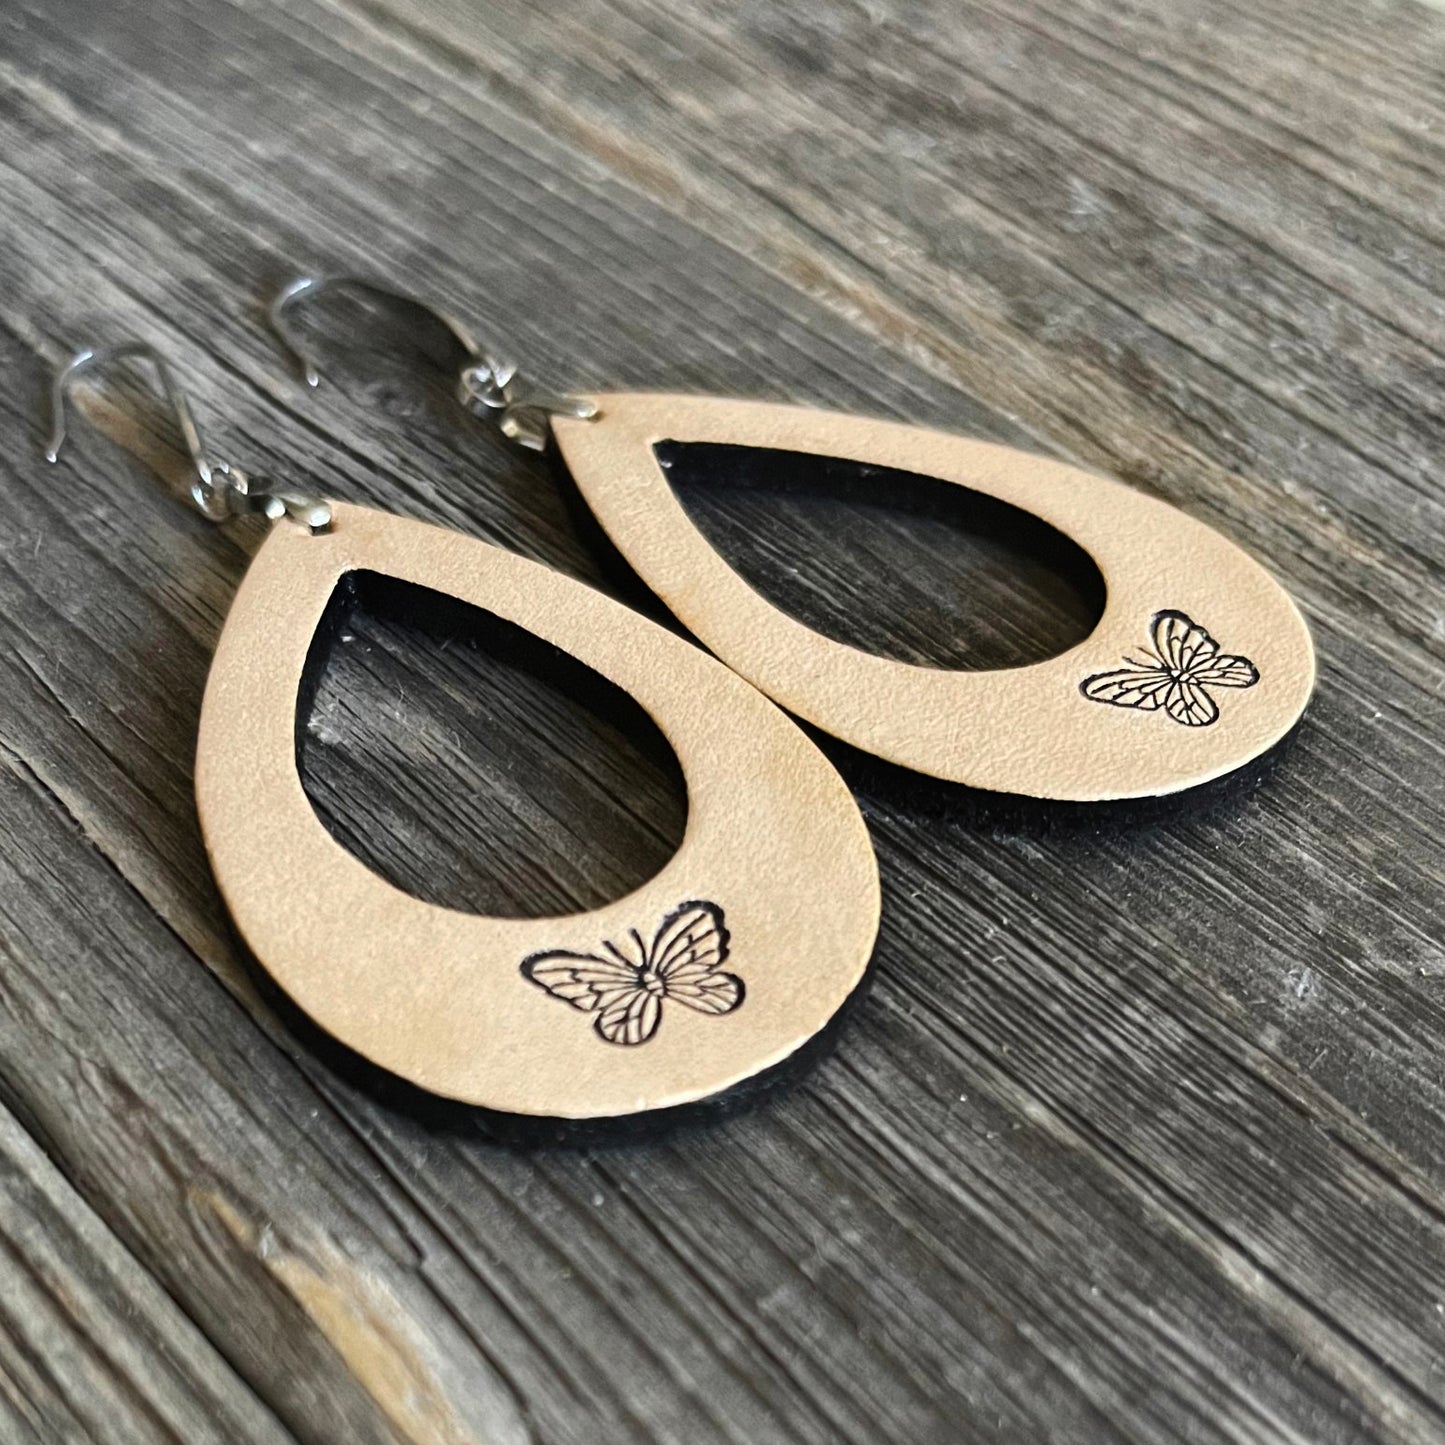 MADE TO ORDER -One of a Kind, genuine leather two-tone boho handmade earrings with butterfly design